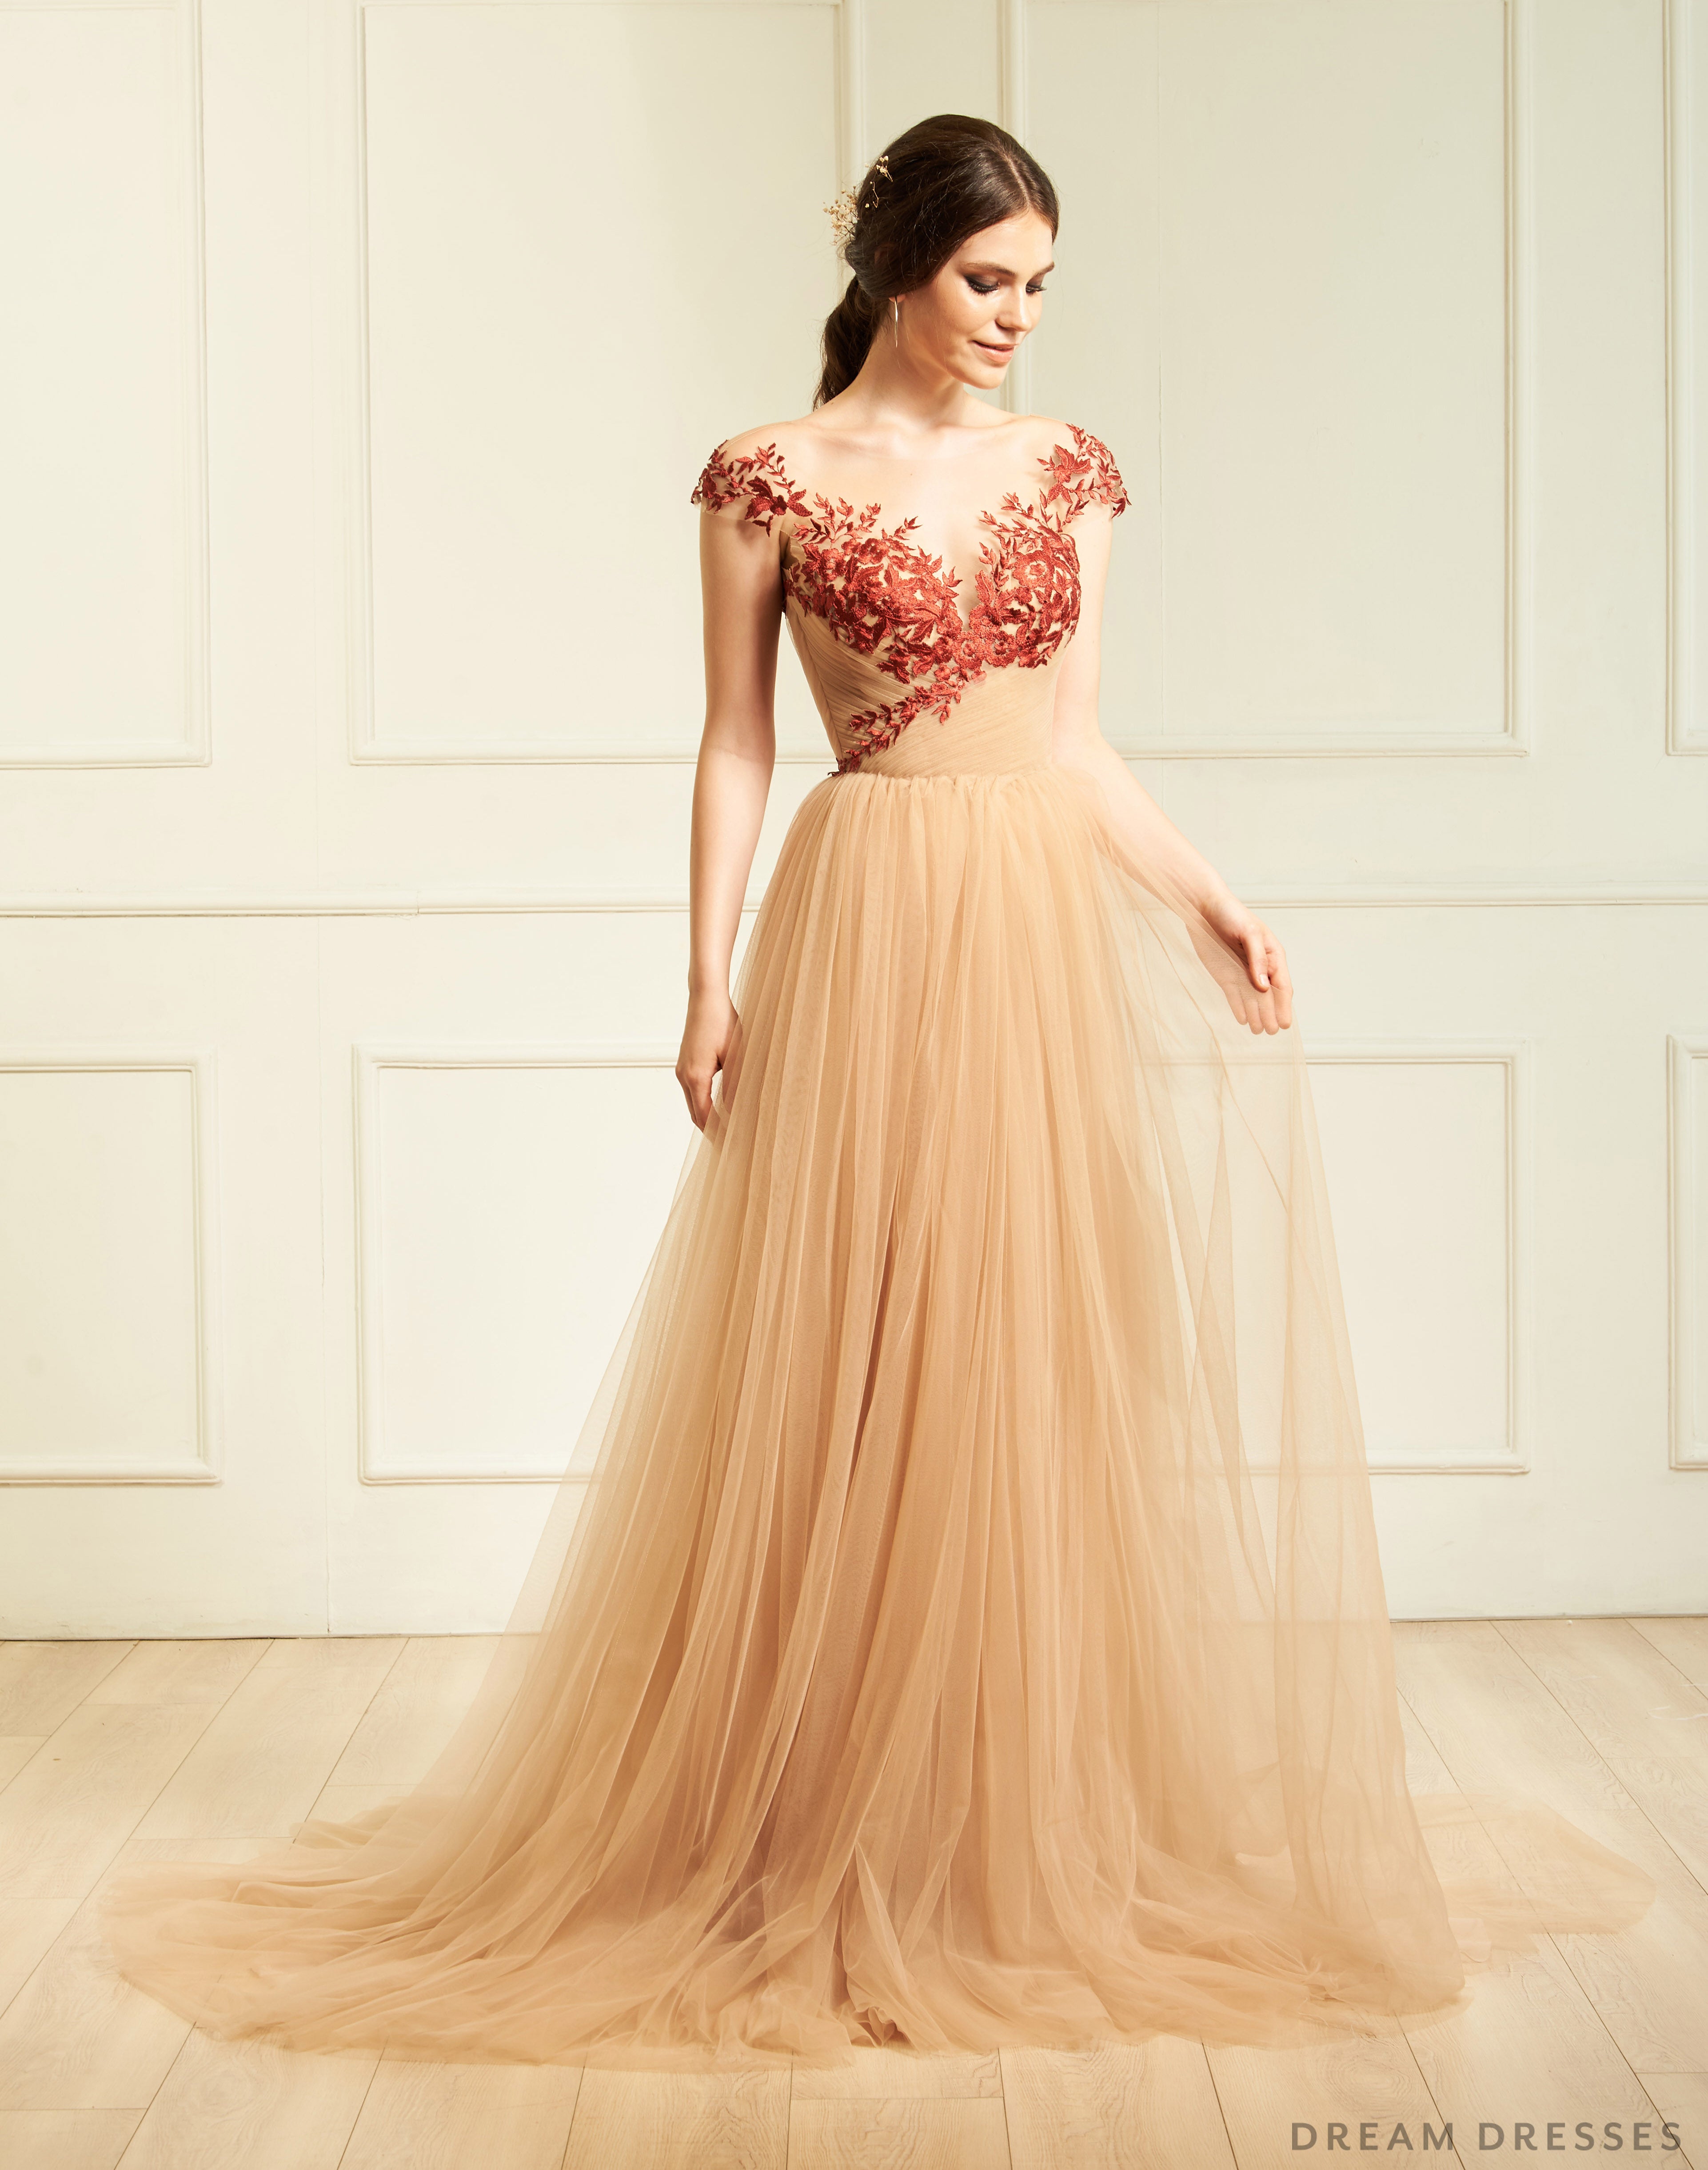 Nude Wedding Gown with Red Lace (#Aida )